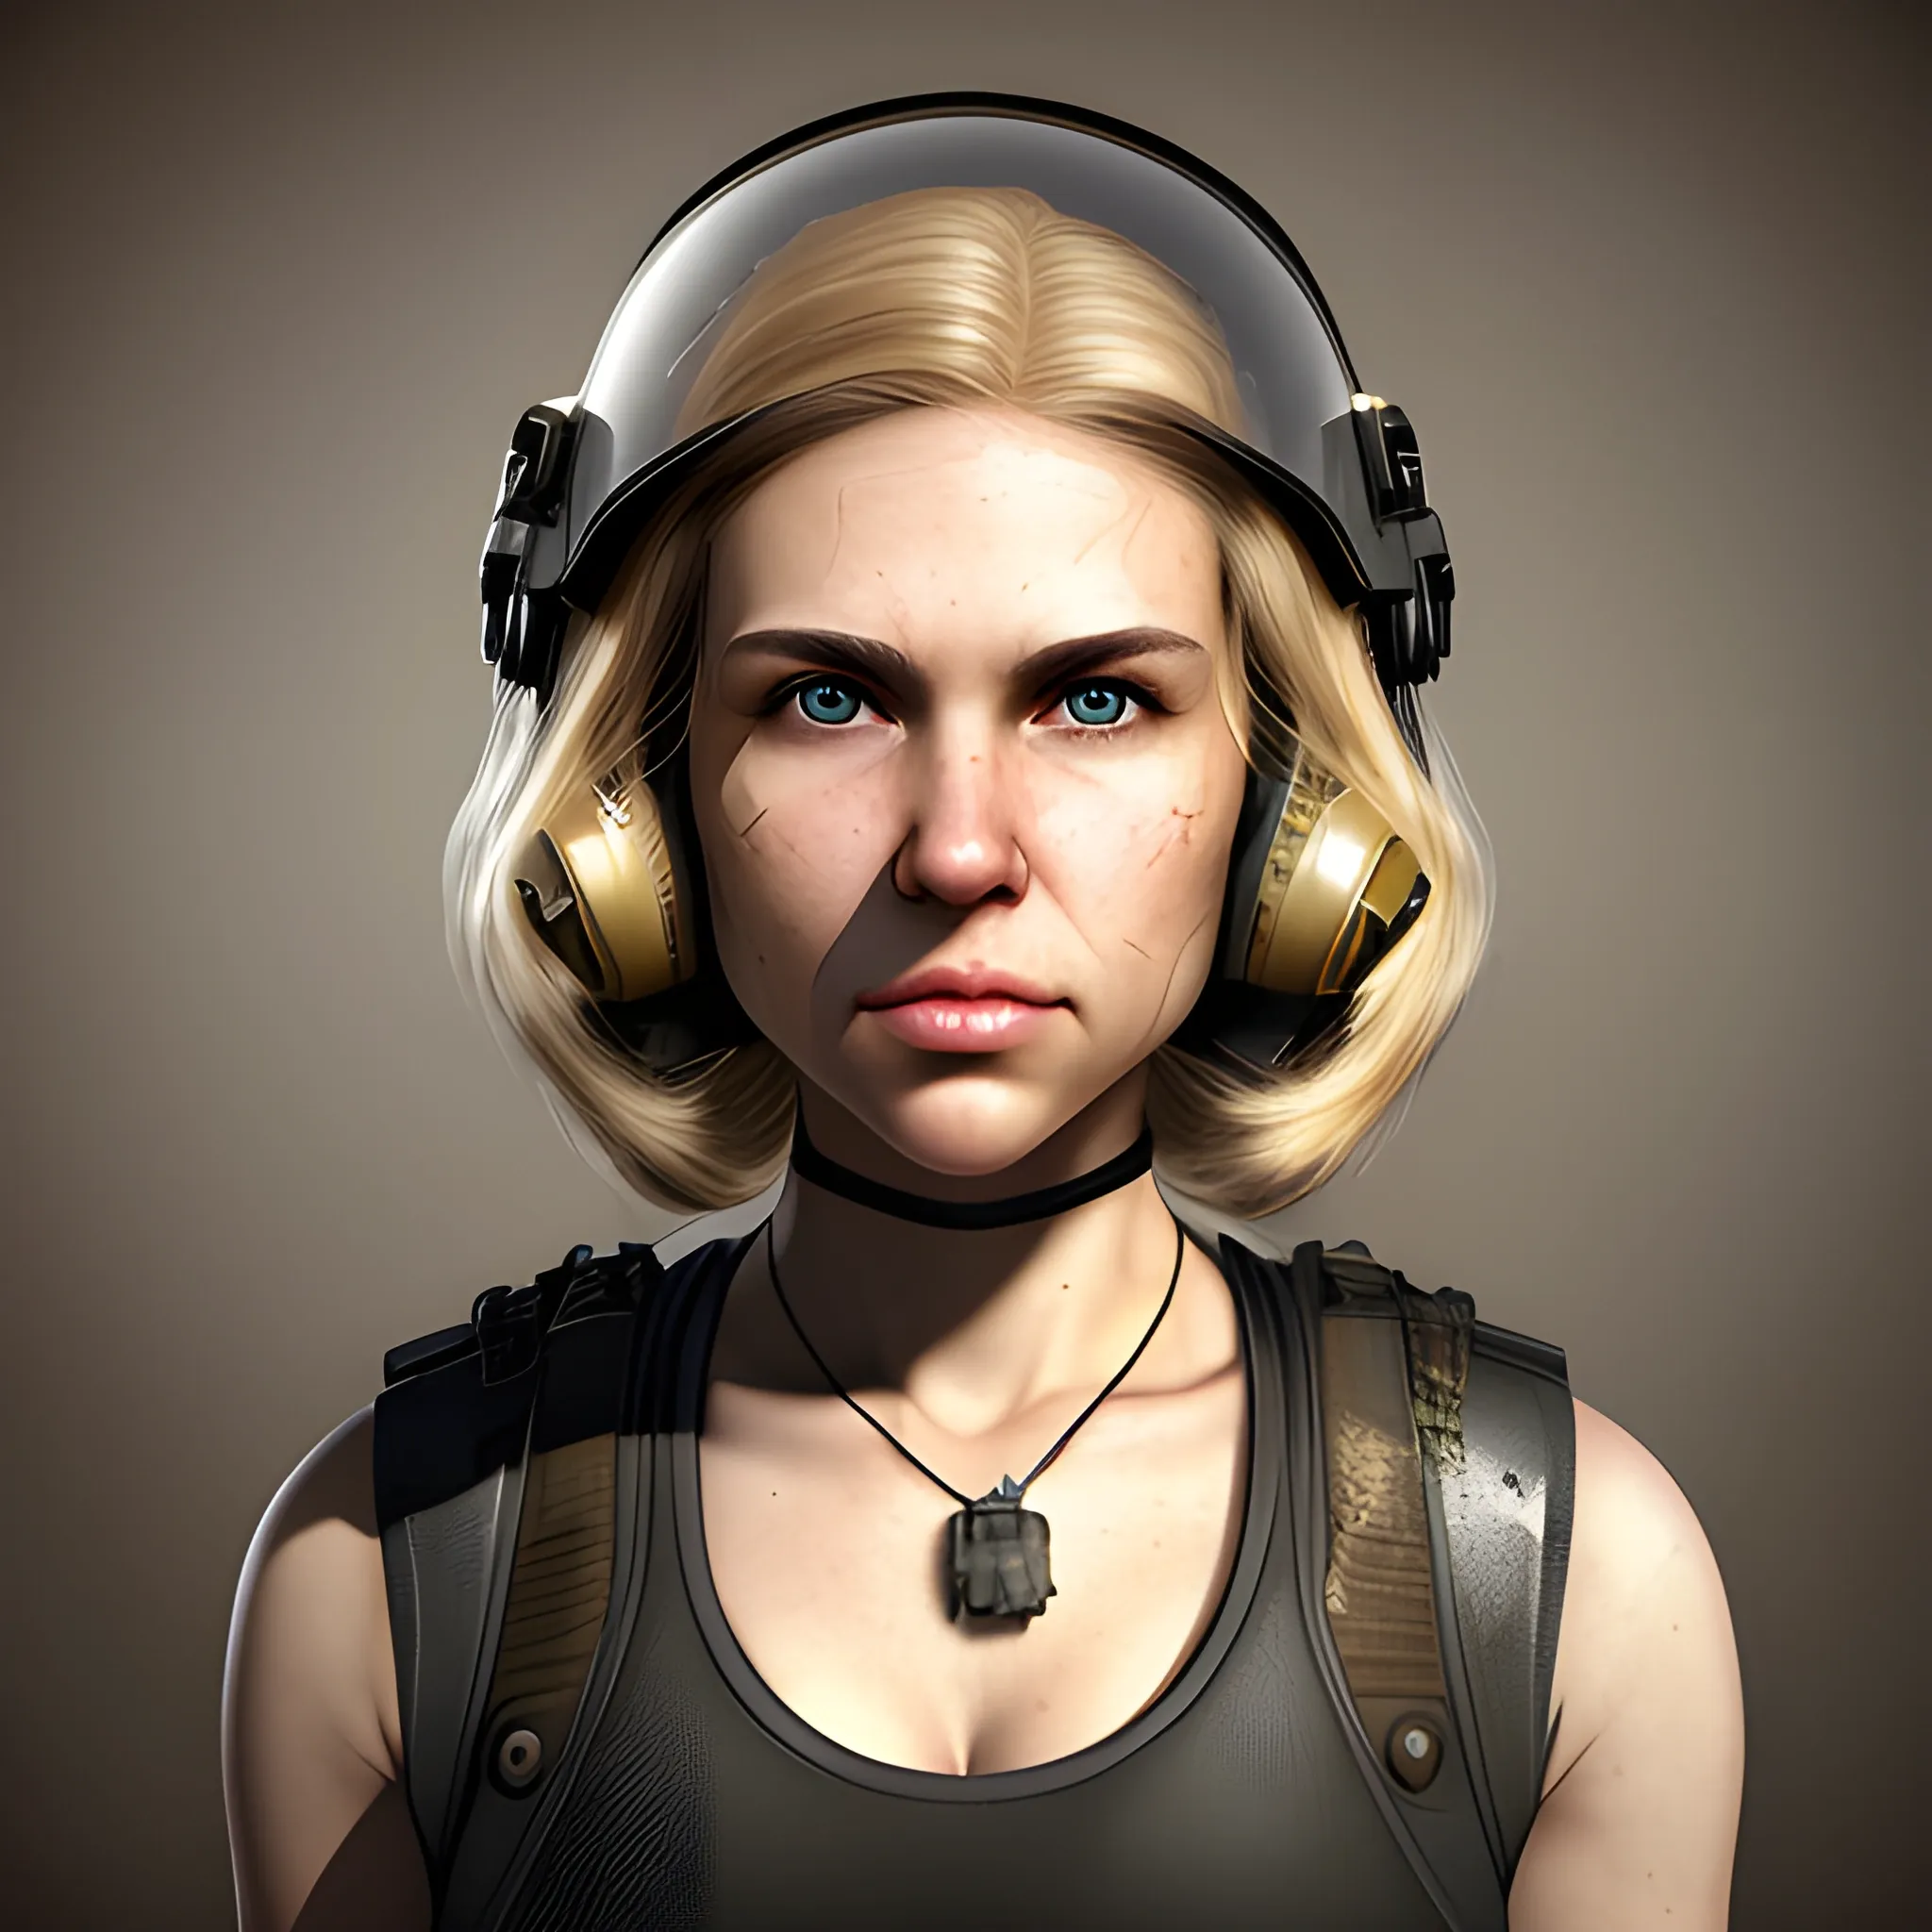 In the style of fallout 1, (masterpiece), (portrait photography), (portrait of a Caucasian female), no makeup, flat chested, white sports bra, dogtags, long hair, blond hair, brown eyes, full lips, round face, round nose, plump cheeks, black Bulletproof vest, jet fighter pilot helmet